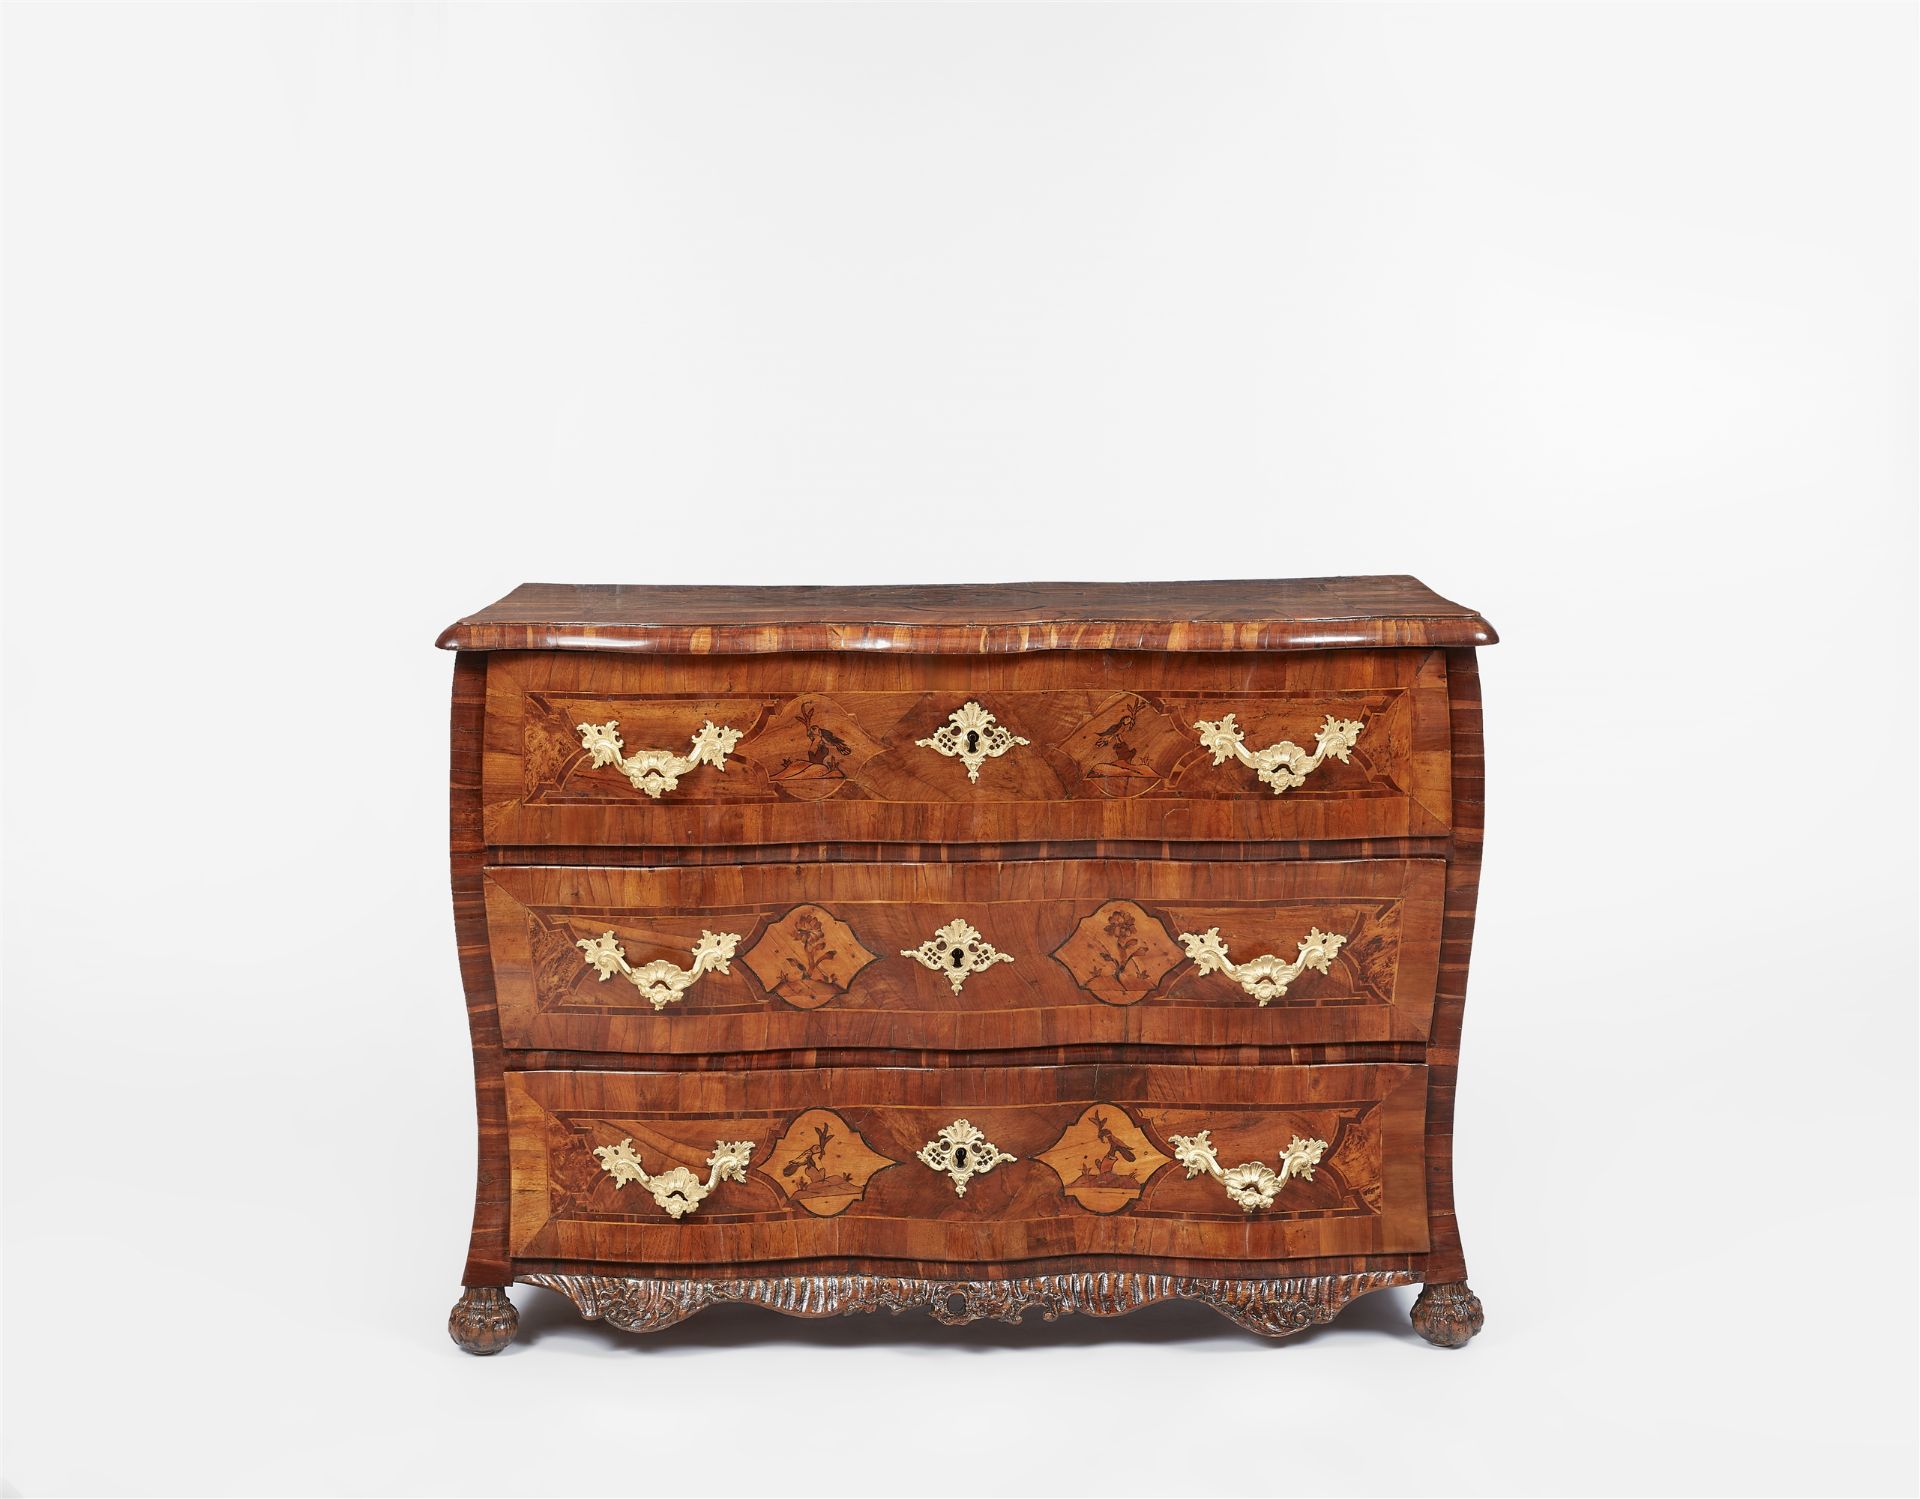 A German chest of drawers